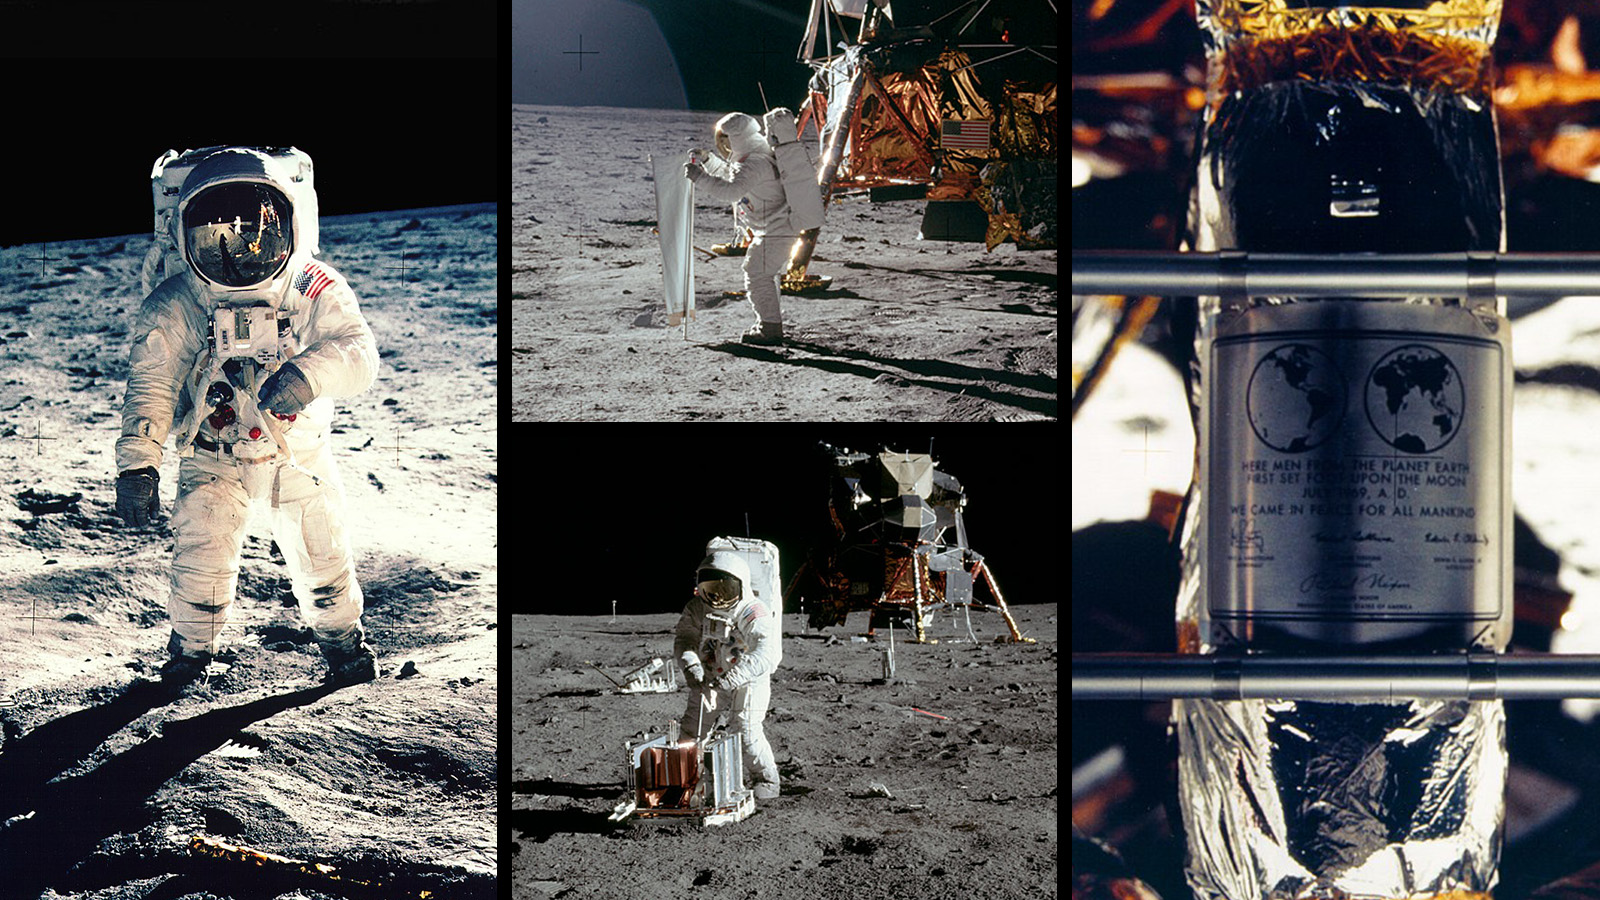 Collage of images showing Buzz Aldrin doing various activities on the Moon.